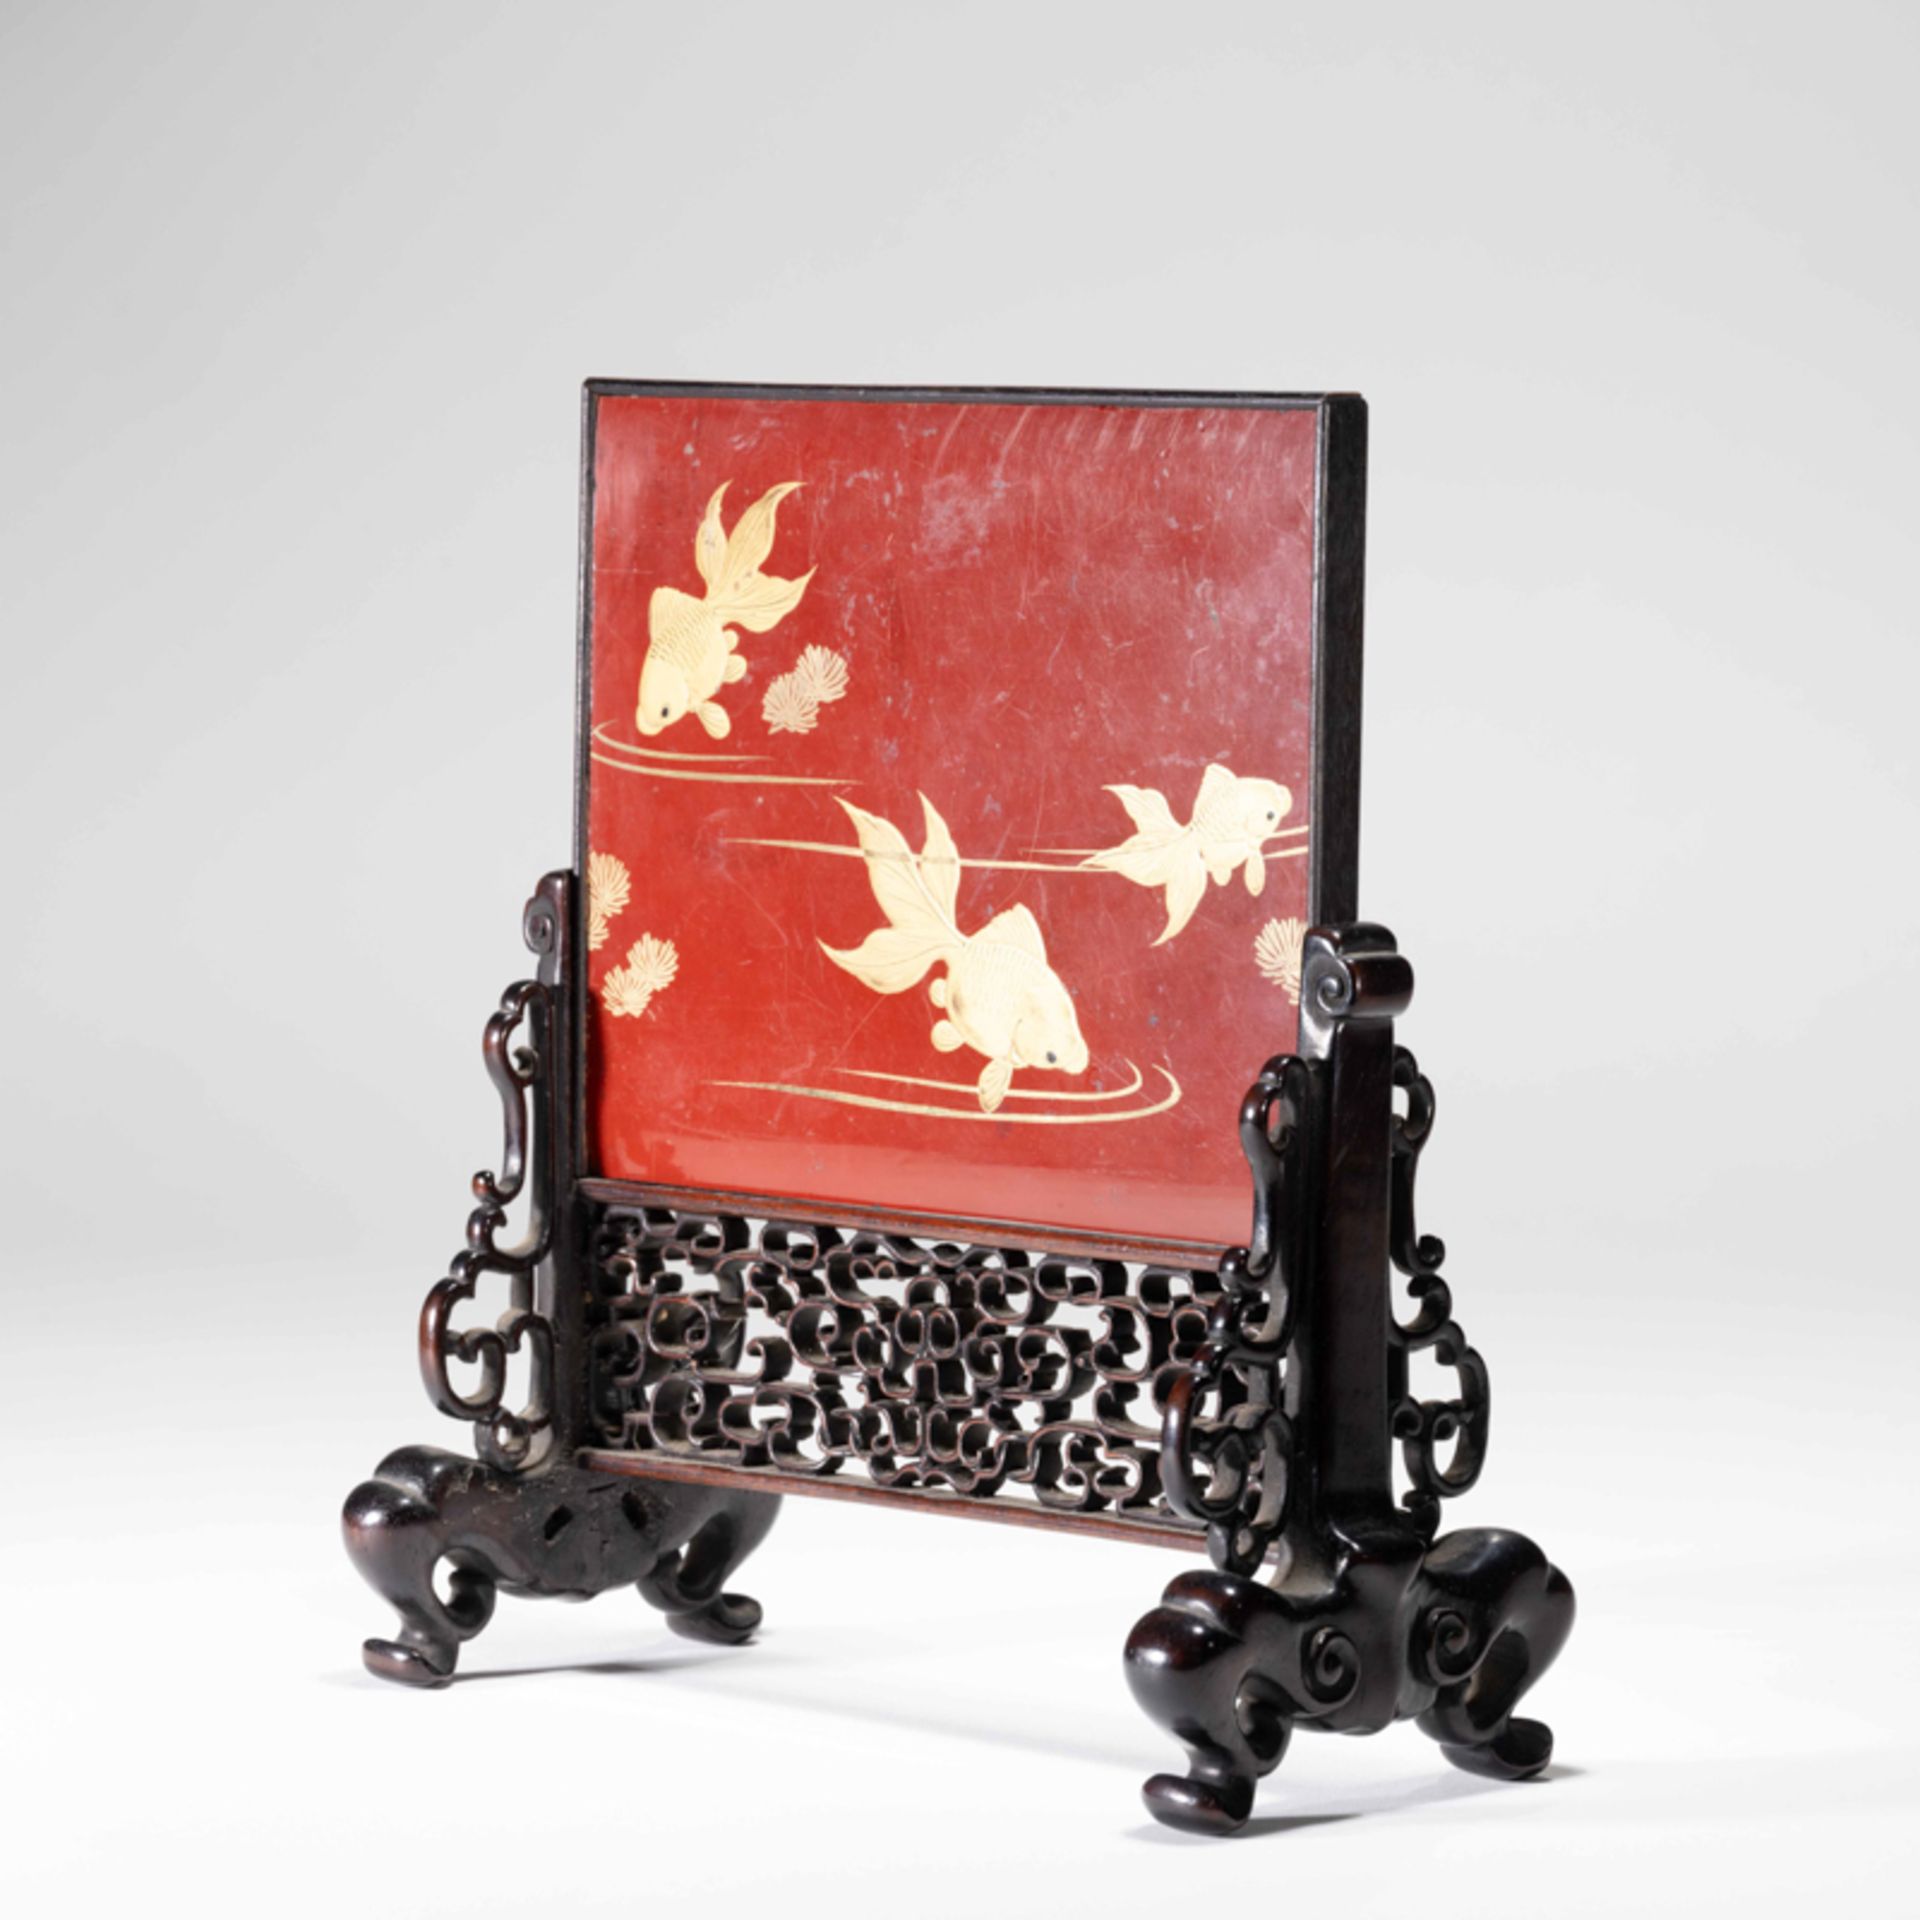 A LACQUER TABLE SCREEN WITH GOLD PAINTED GOLDFISH DESIGN  - Image 2 of 9